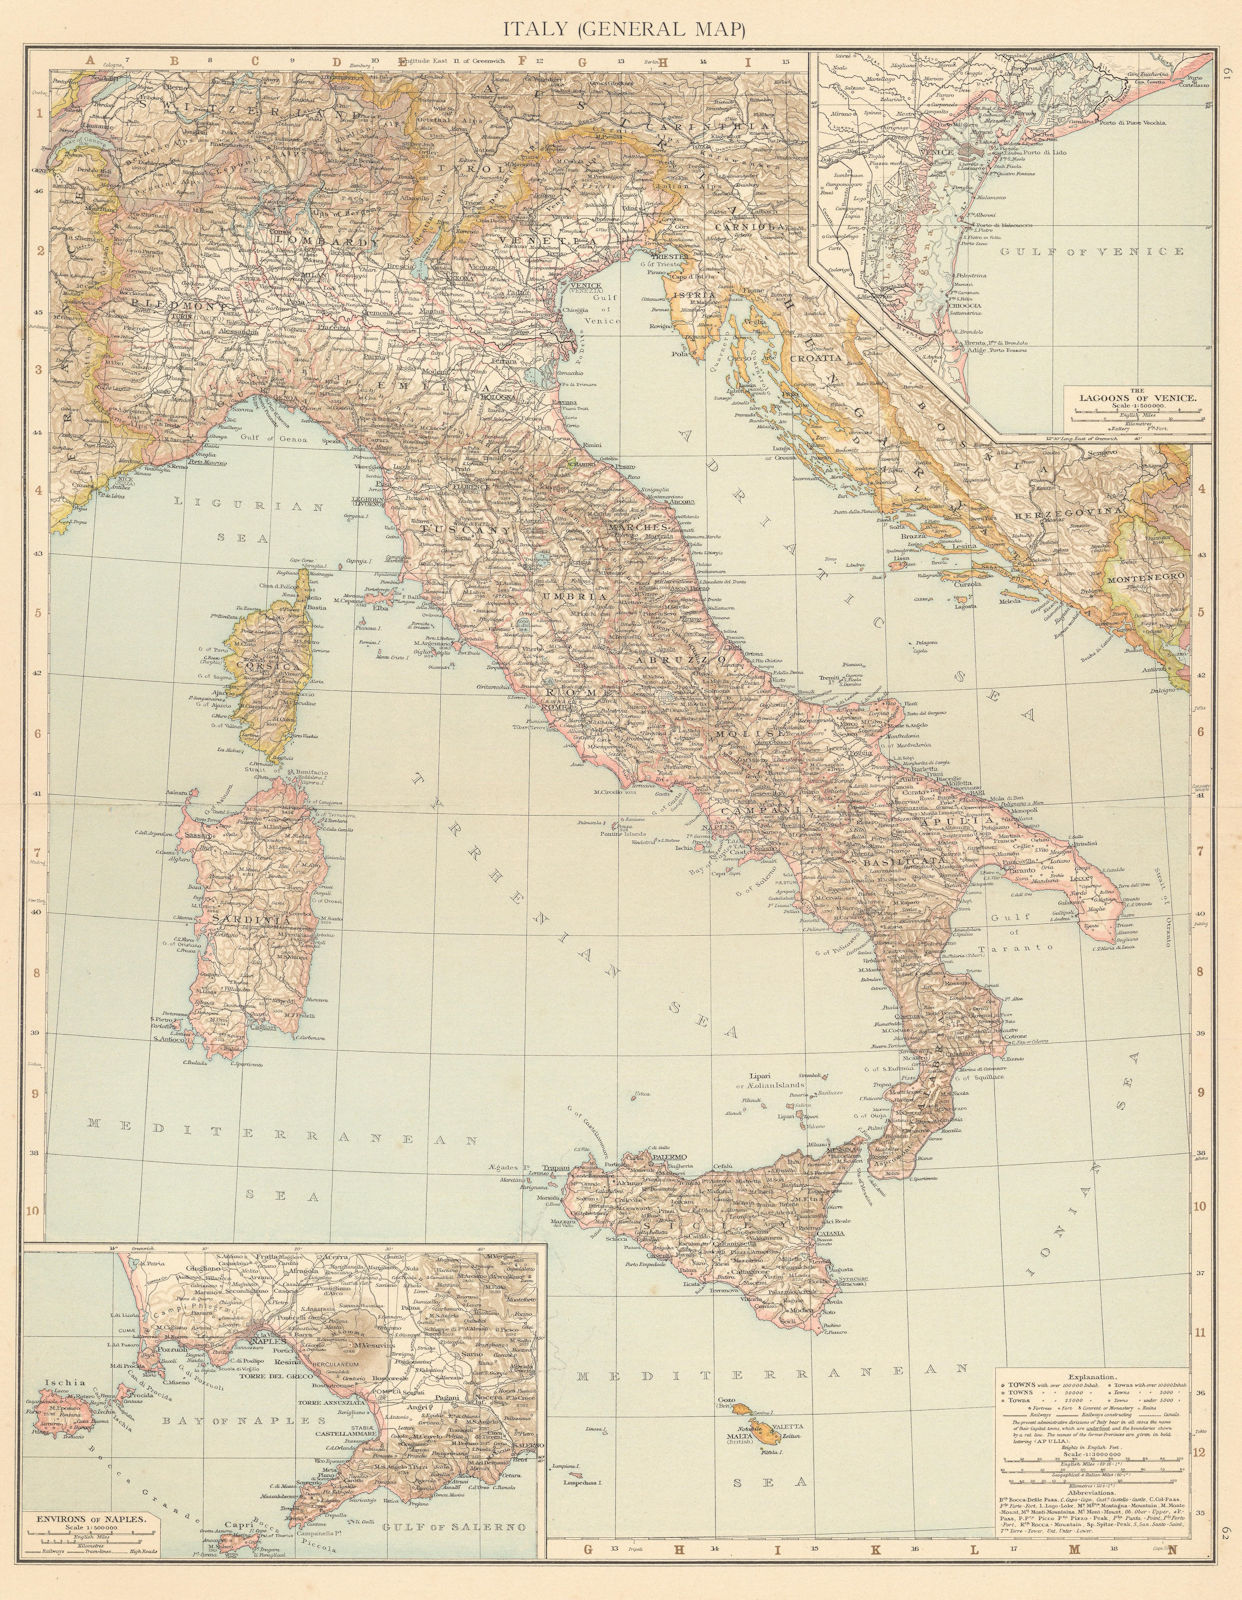 Associate Product Italy (general map). Lagoons of Venice. Environs of Naples. THE TIMES 1895